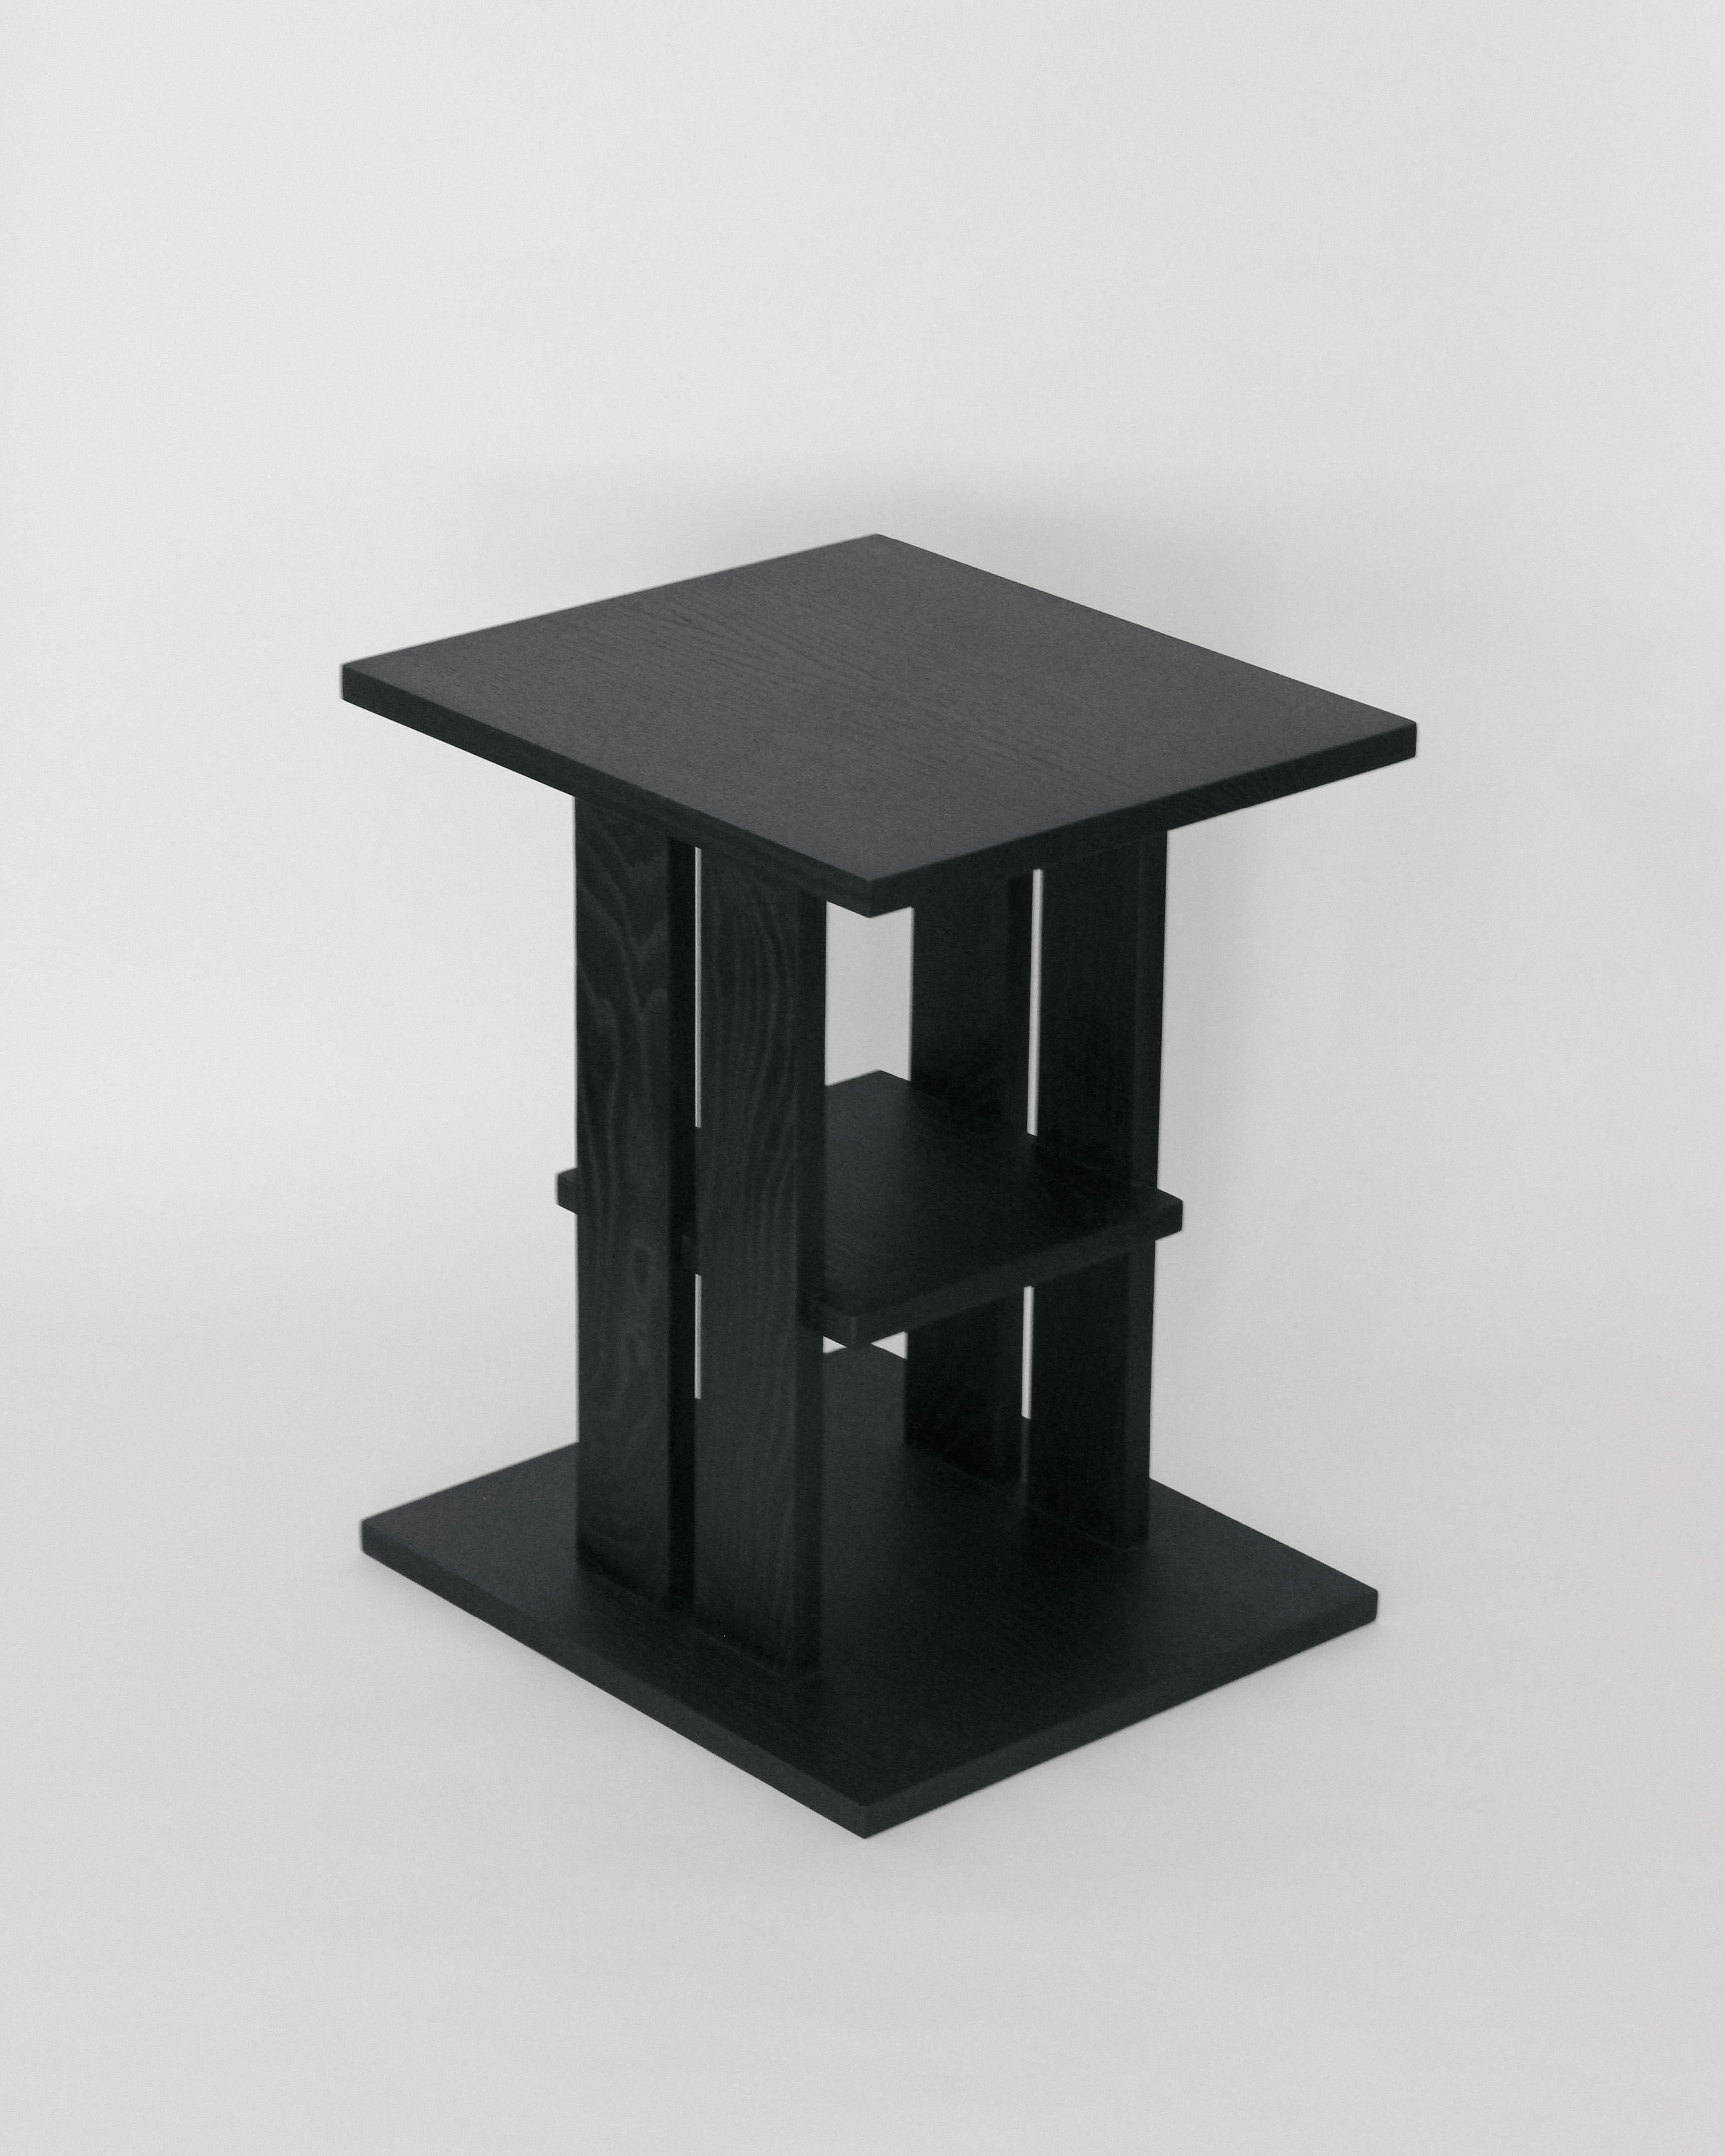 Modernist side table handmade in Oak with an ebonized black finish. Made in Los Angeles by expert craftsmen, and designed by Christian Sanchez. 

This table draws inspiration from modernist furniture of the 1950's, and is defined by clean lines and